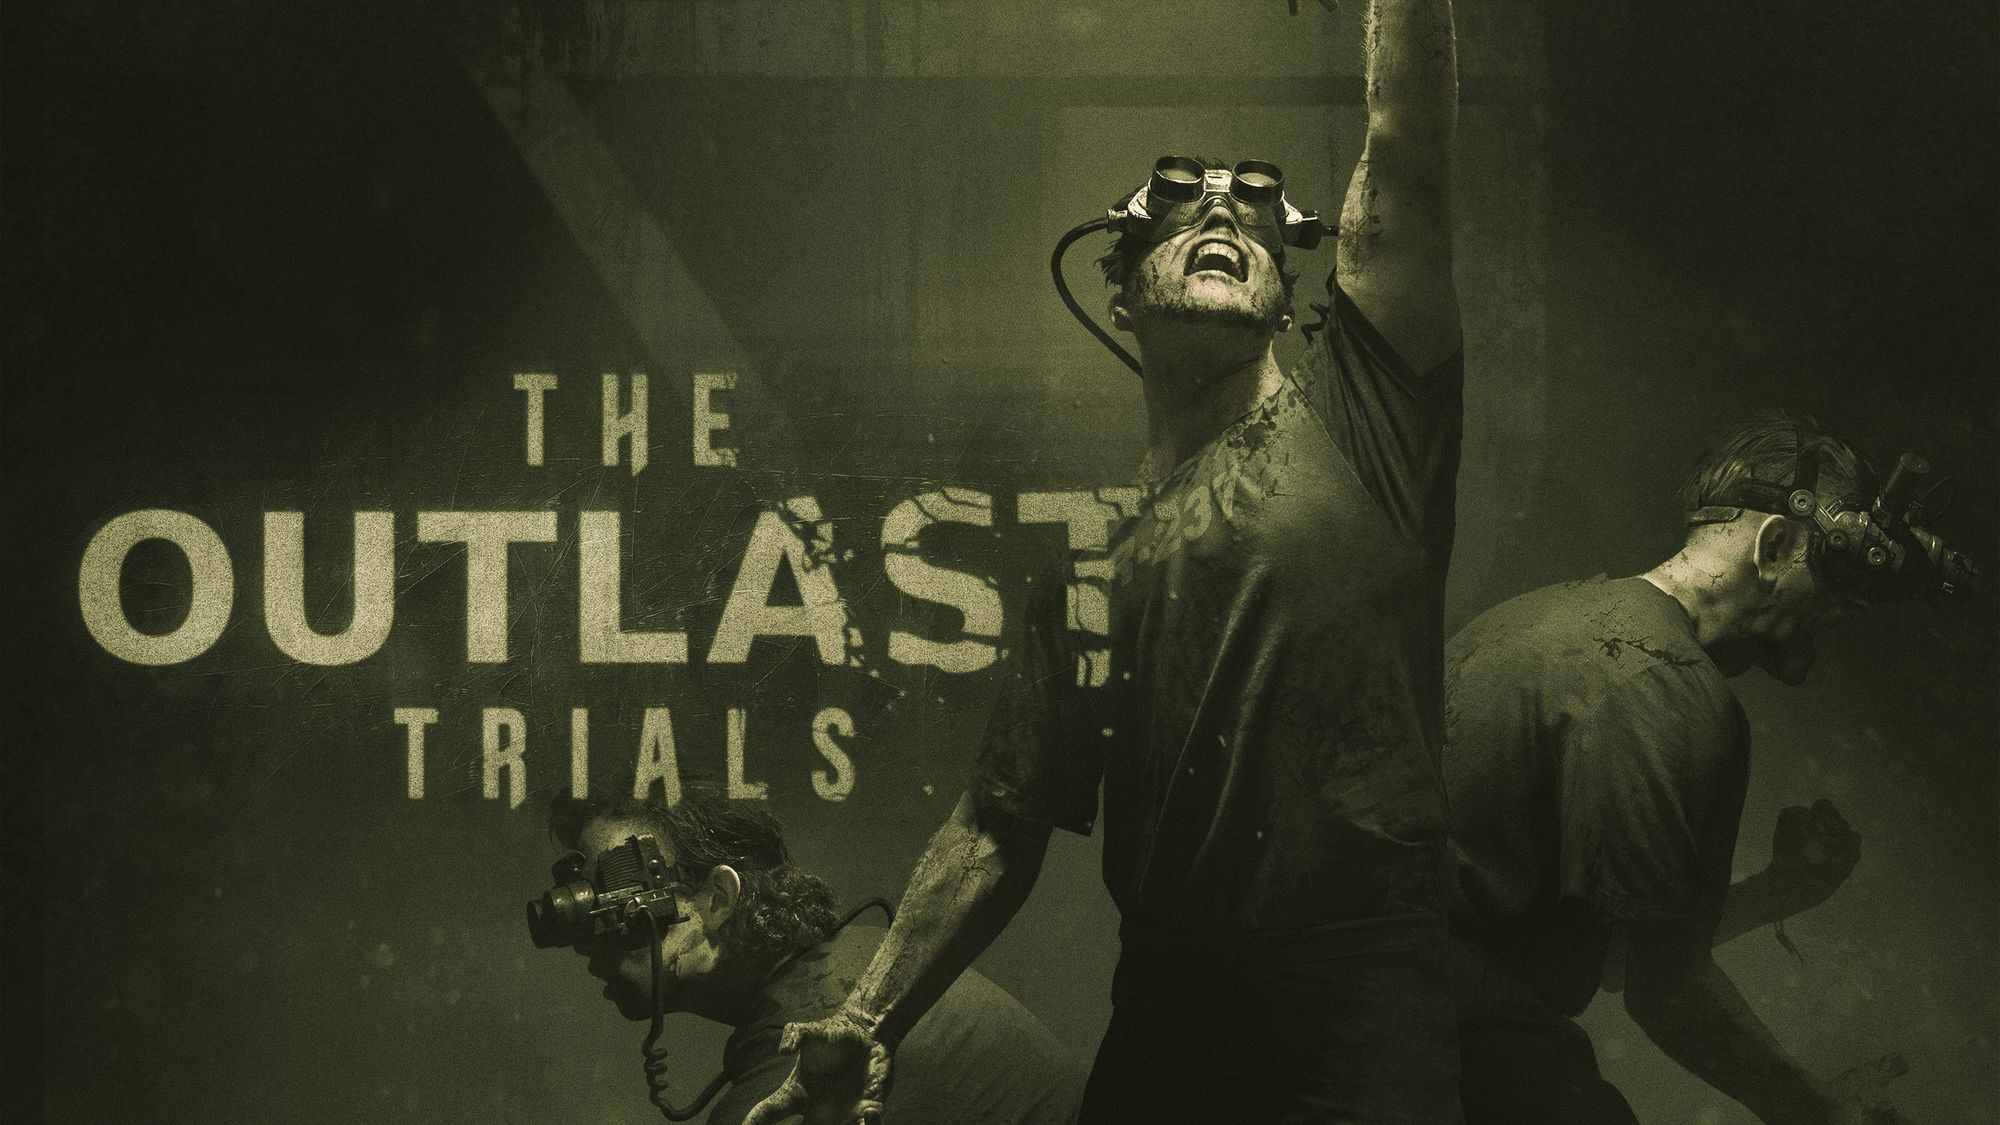 New Content is coming to The Outlast Trials.